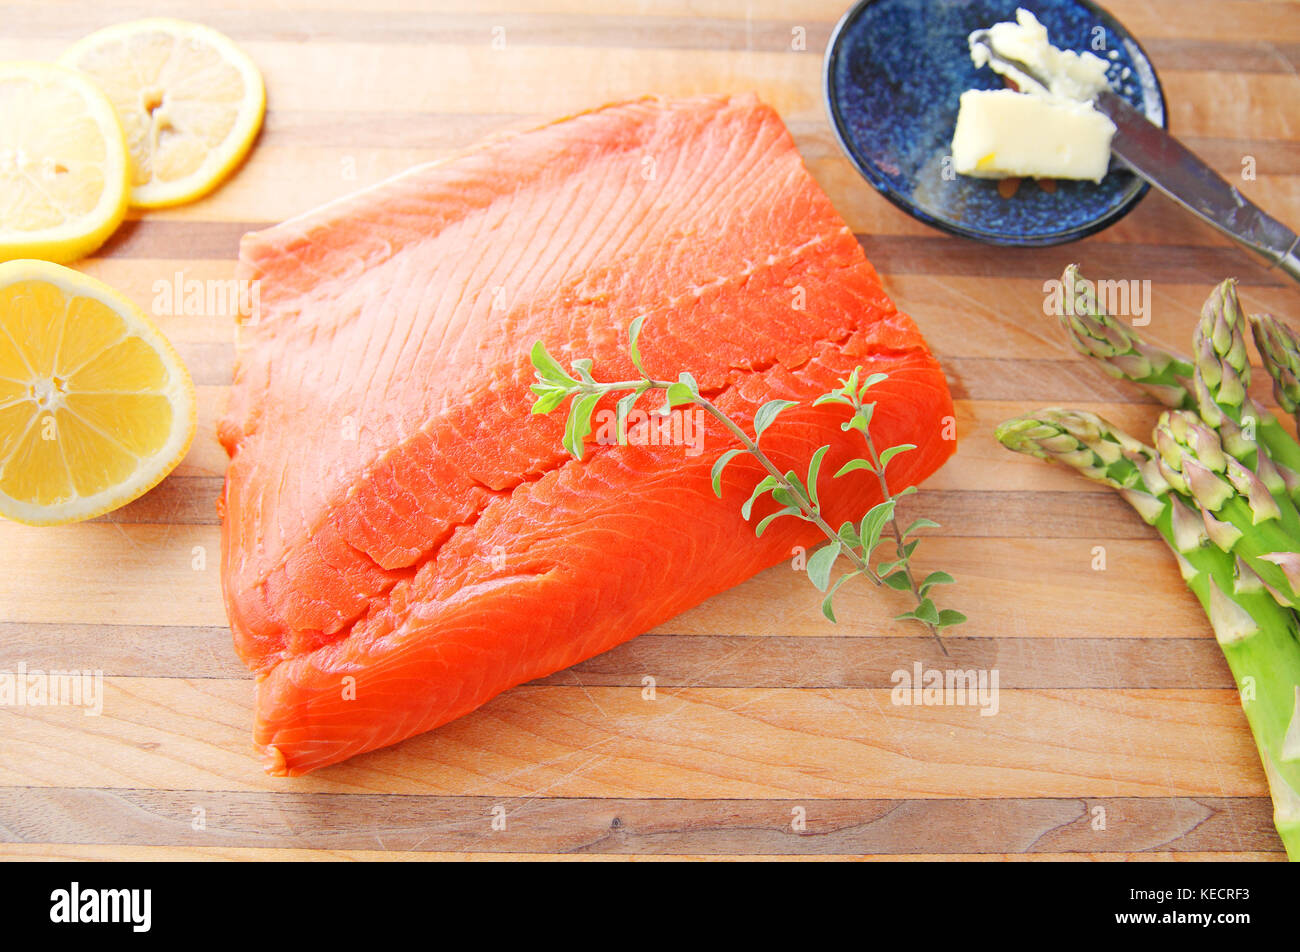 Fresh portion of salmon with lemon, asparagus, butter and fresh herbs on a cutting board Stock Photo